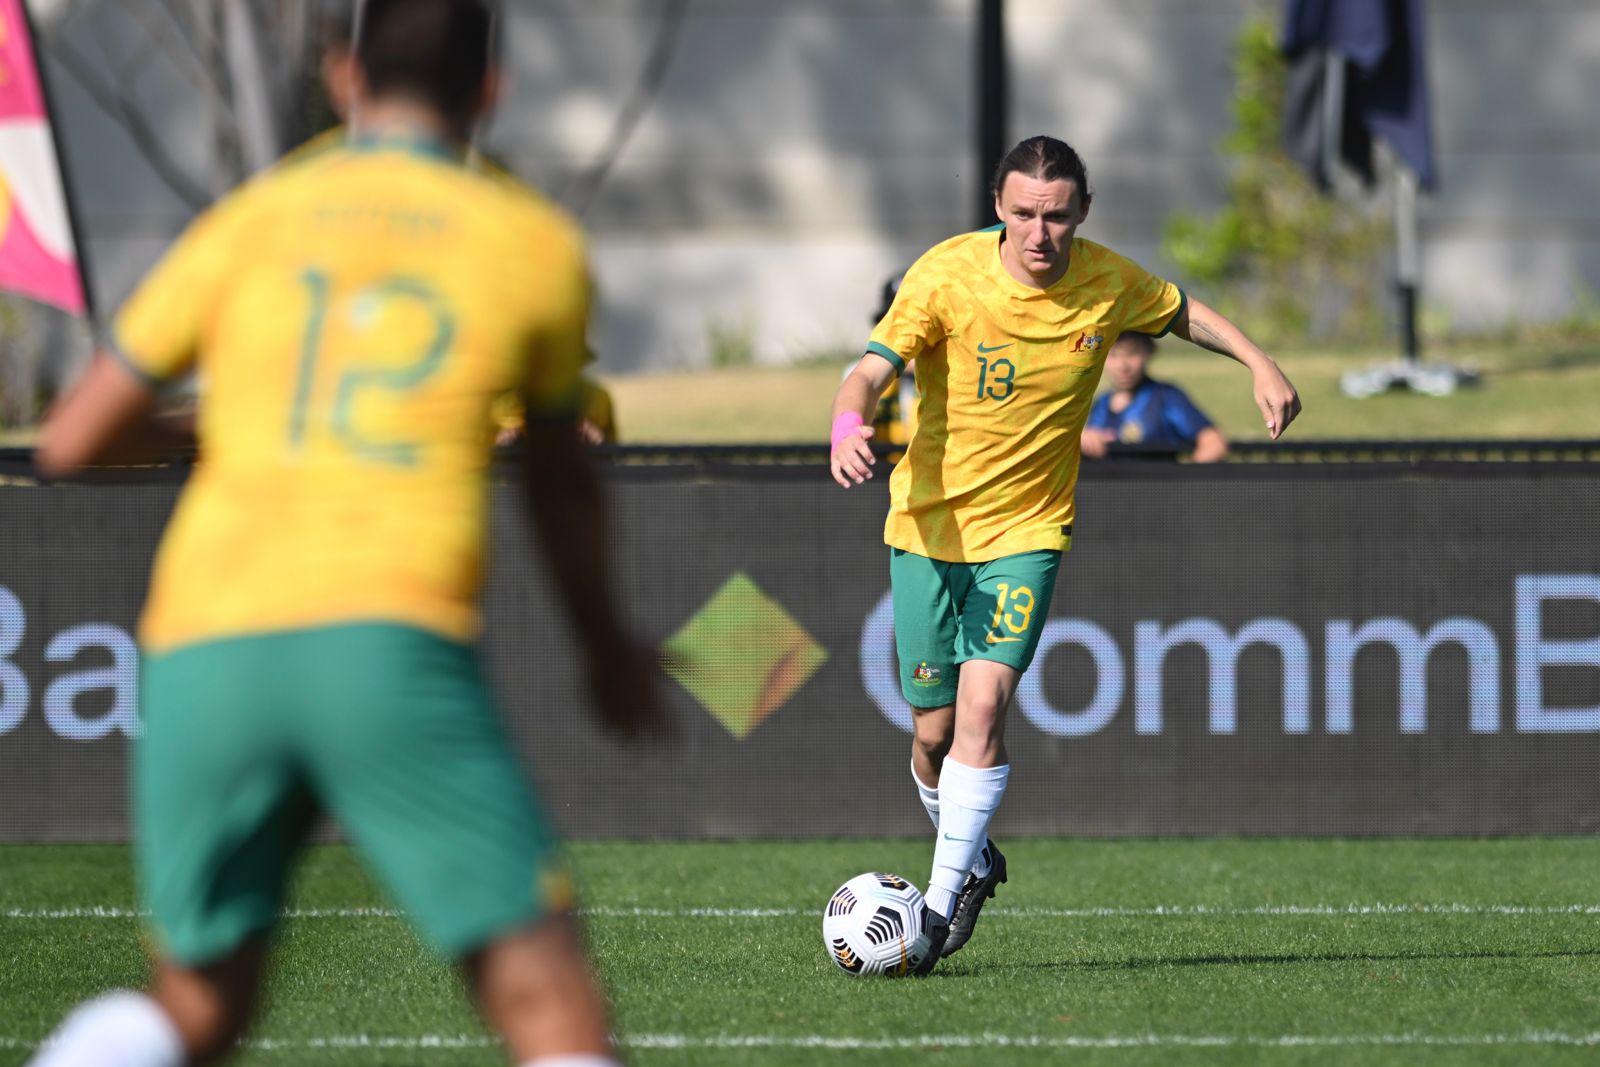 Taj Lynch dribbles the ball for the CommBank Pararoos against India at the IFCPF Asia Oceania Championships